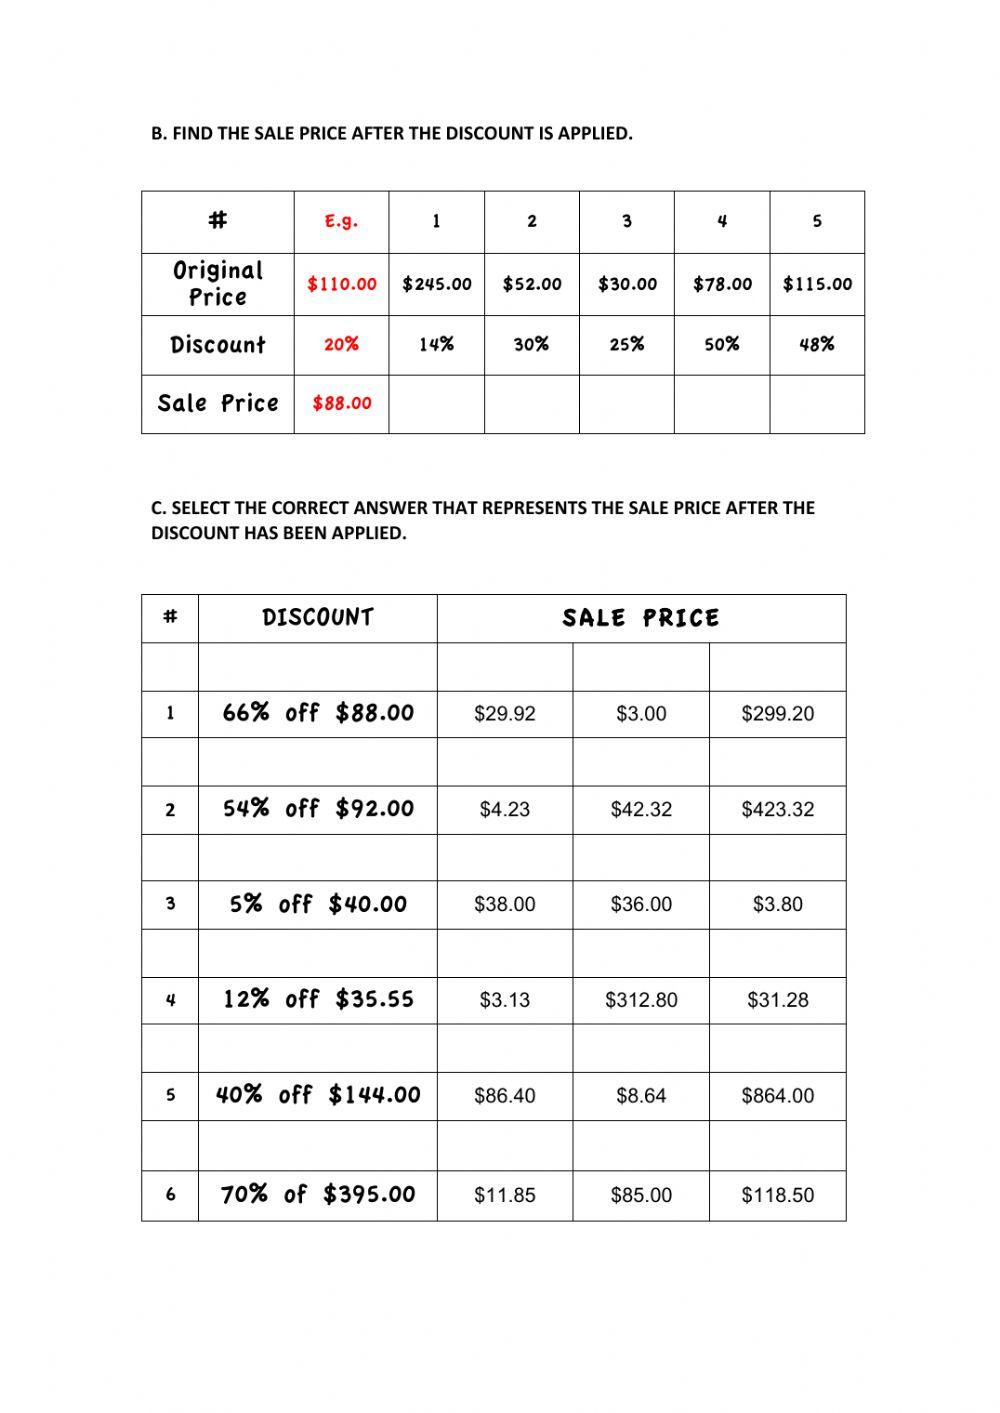 Calculating Sale Price given a Discount